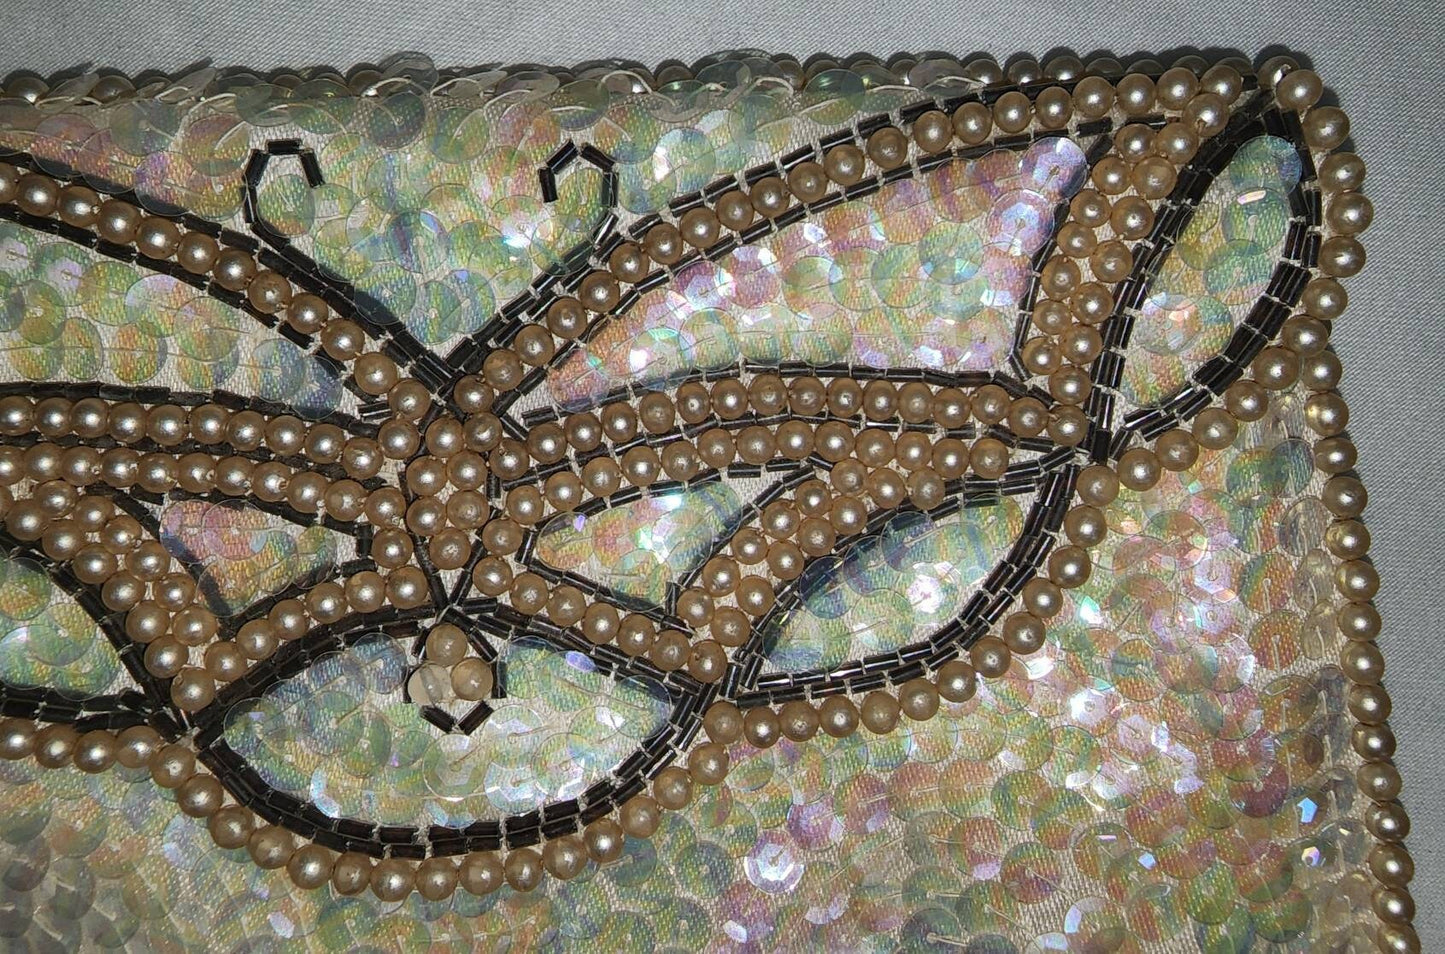 Vintage Sequin Bead Purse 1960s Small Cream Satin Beaded Sequin Butterfly Clutch Wedding Bridal Rockabilly 7.5 x 5 in. 1 or 2 missing pearl